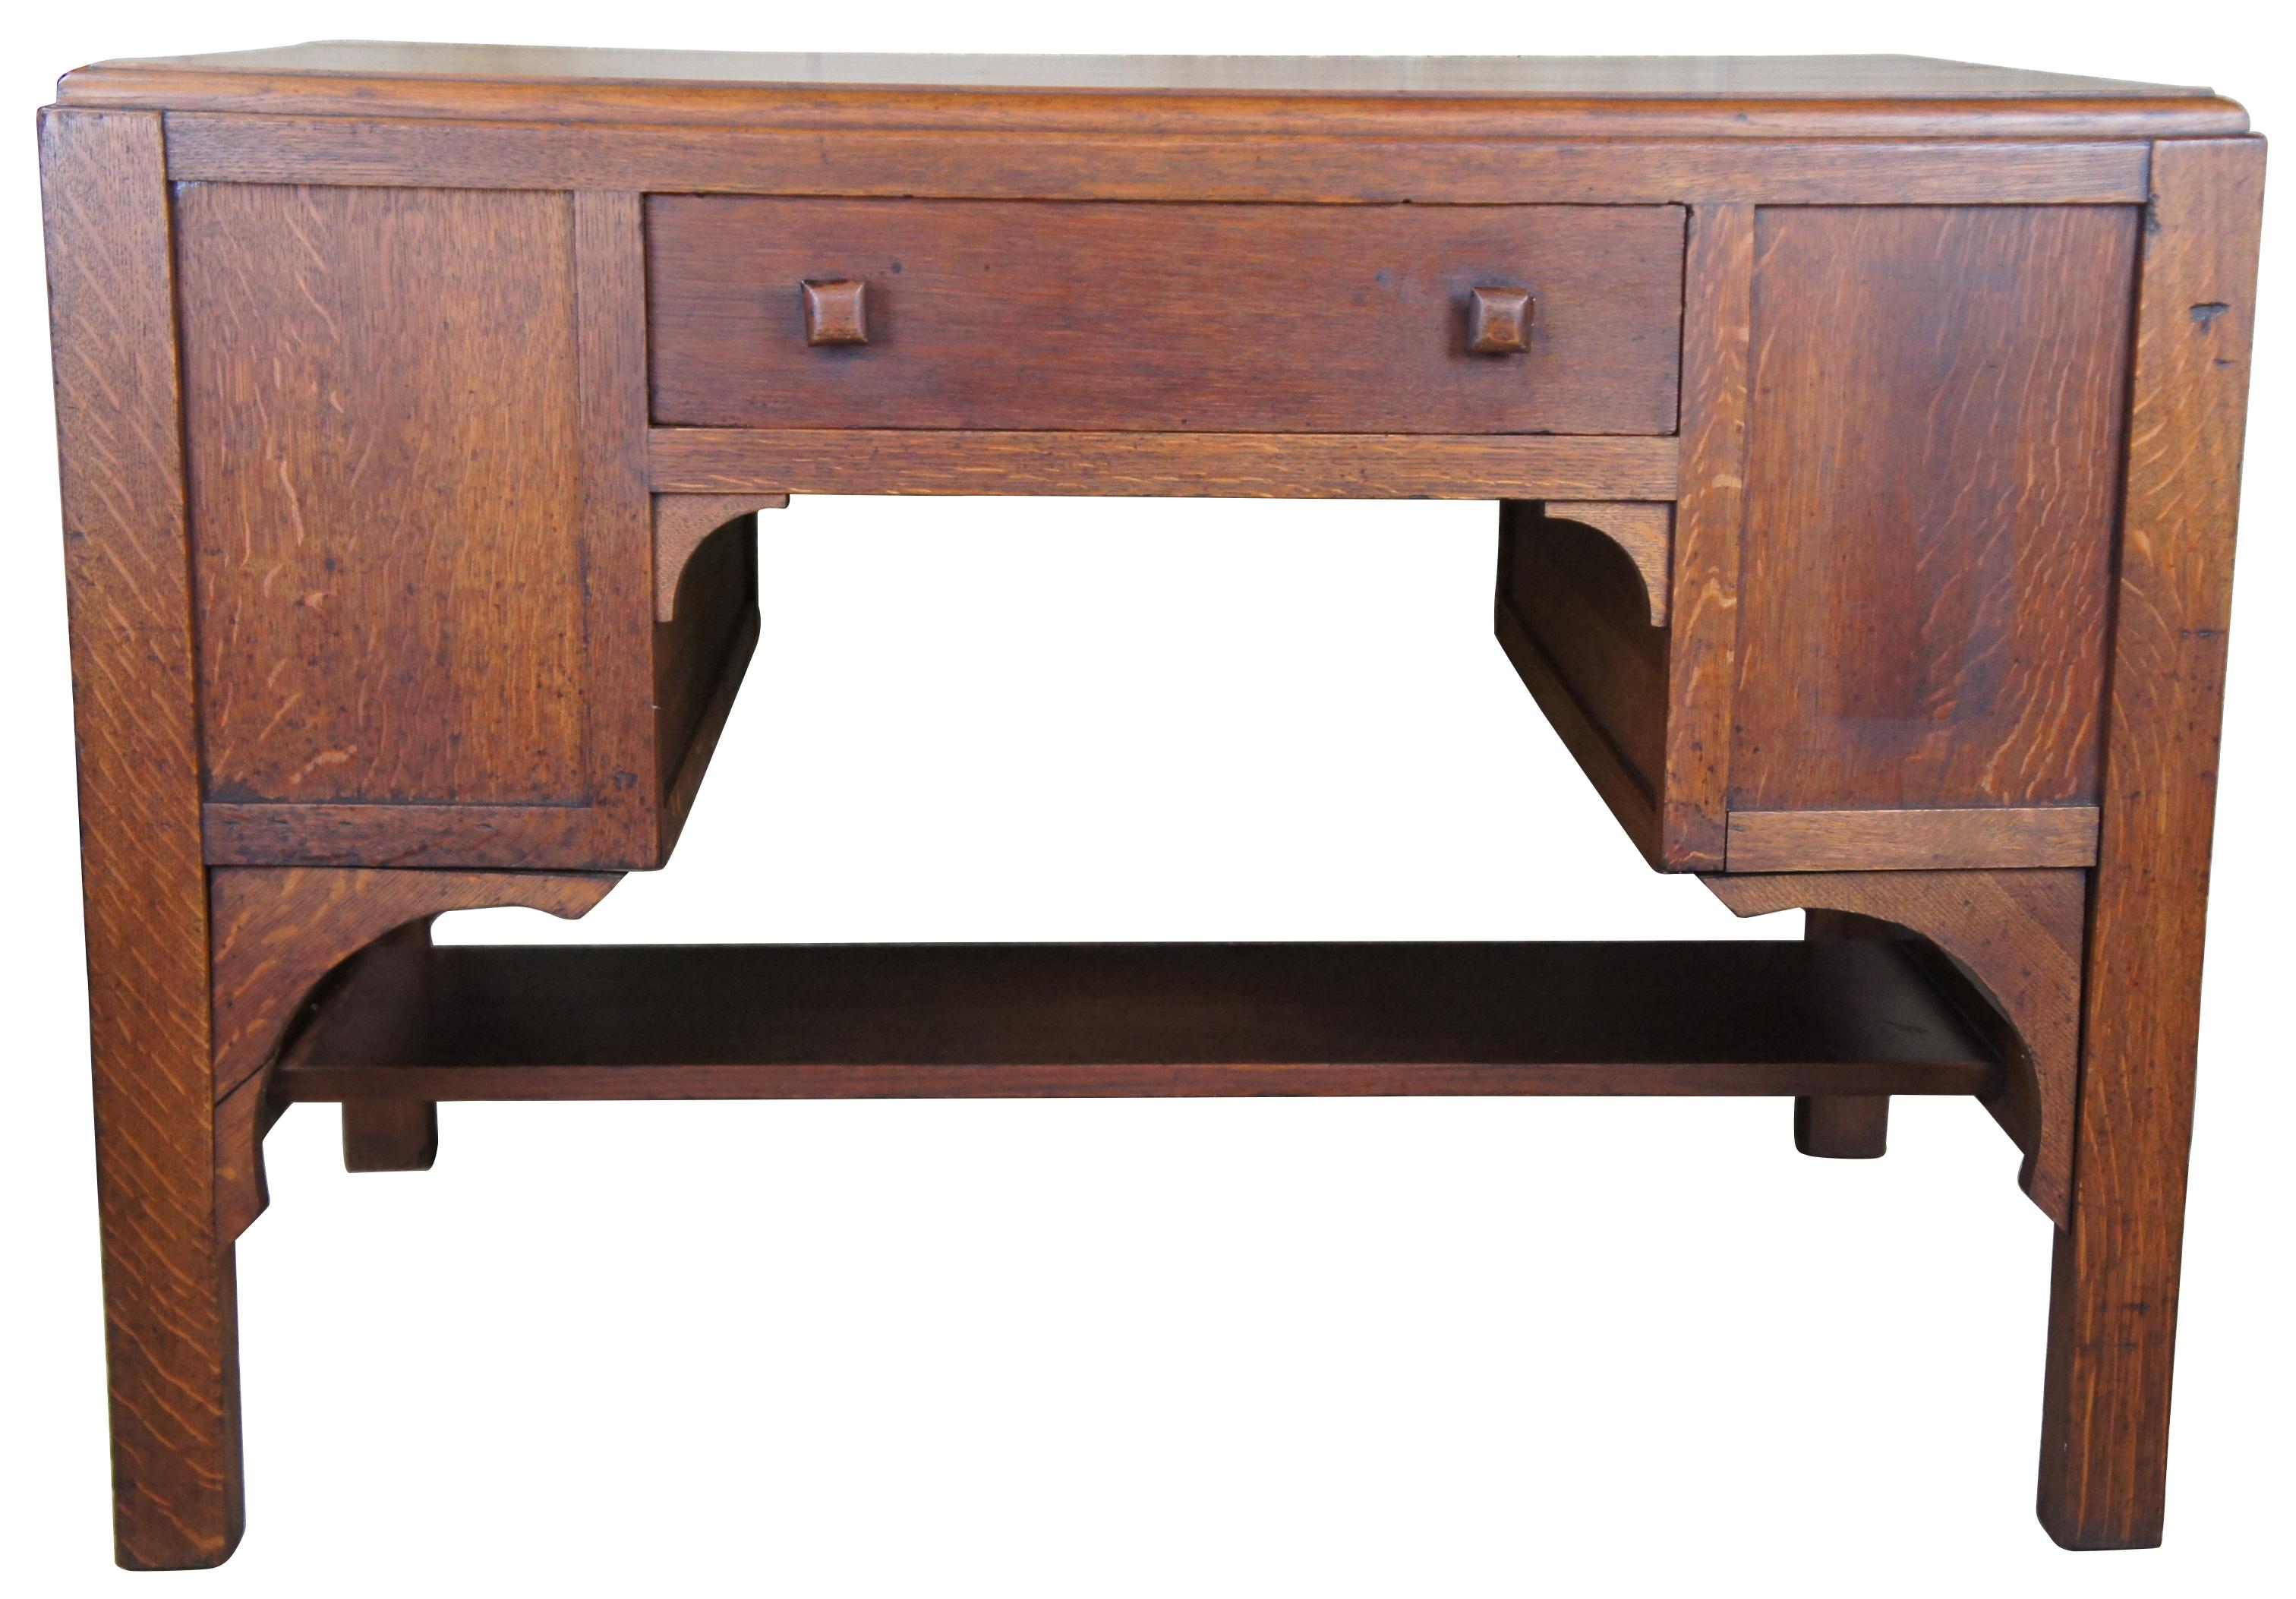 Auglaize Furniture Company 3 in 1 library desk, circa 1920s. Made from quartersawn 